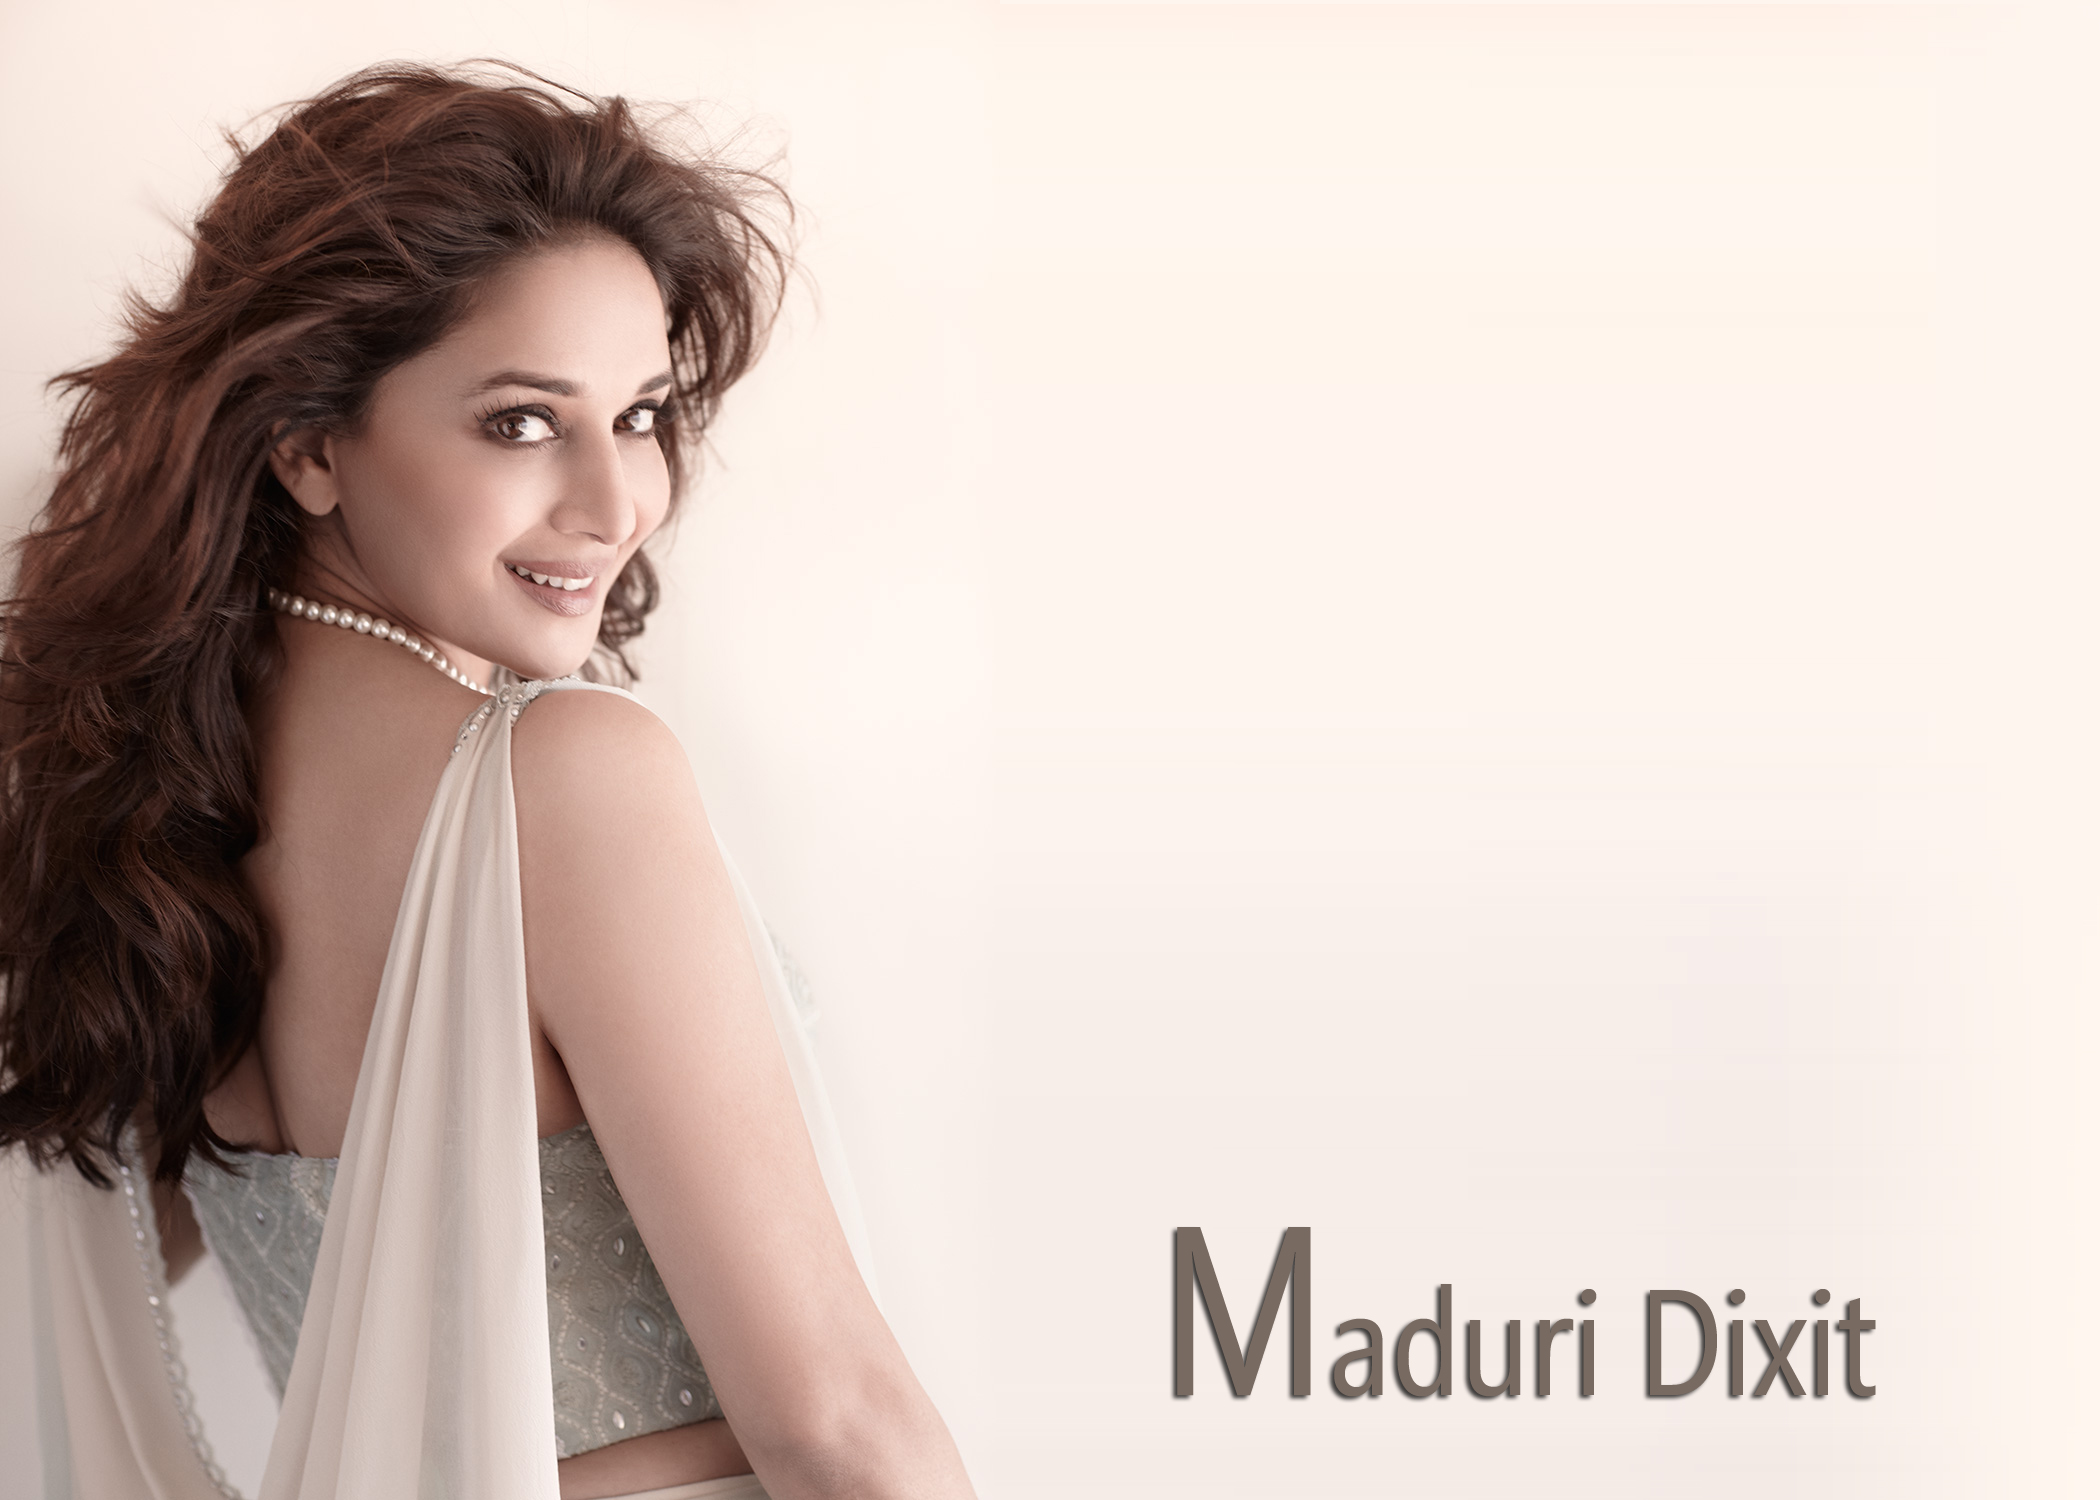 Madhuri Dixit Wallpapers High Resolution and Quality Download